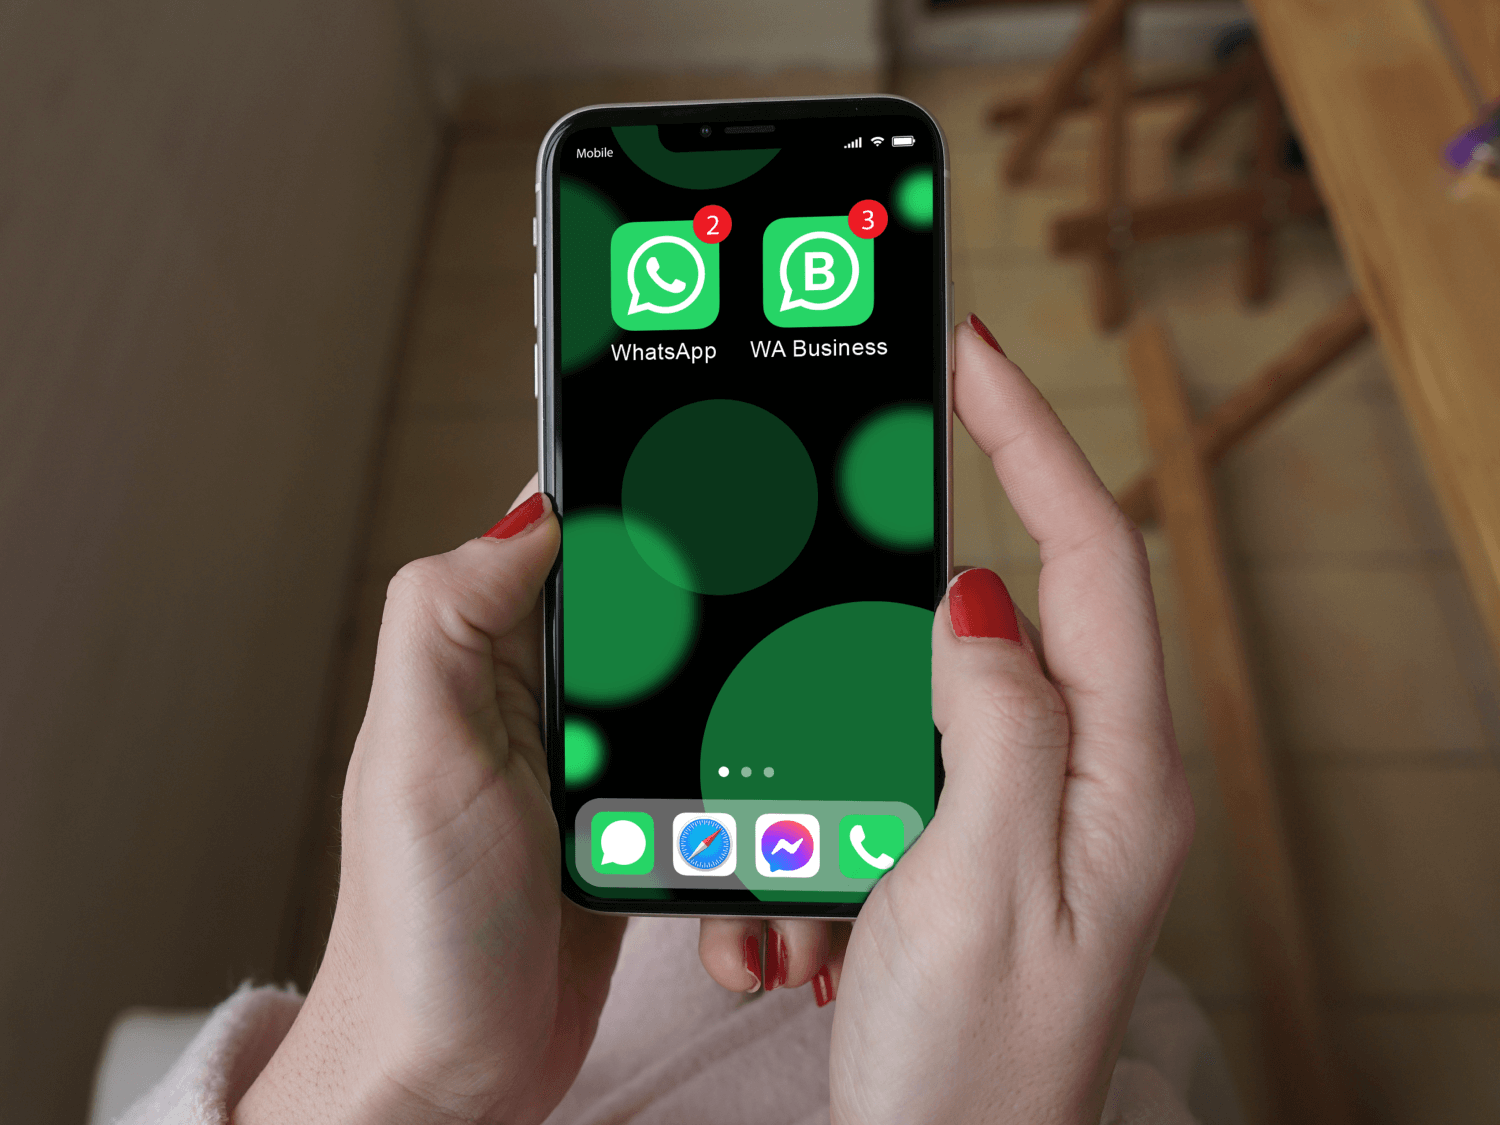 hands holding a phone with WhatsApp and WhatsApp Business installed on it